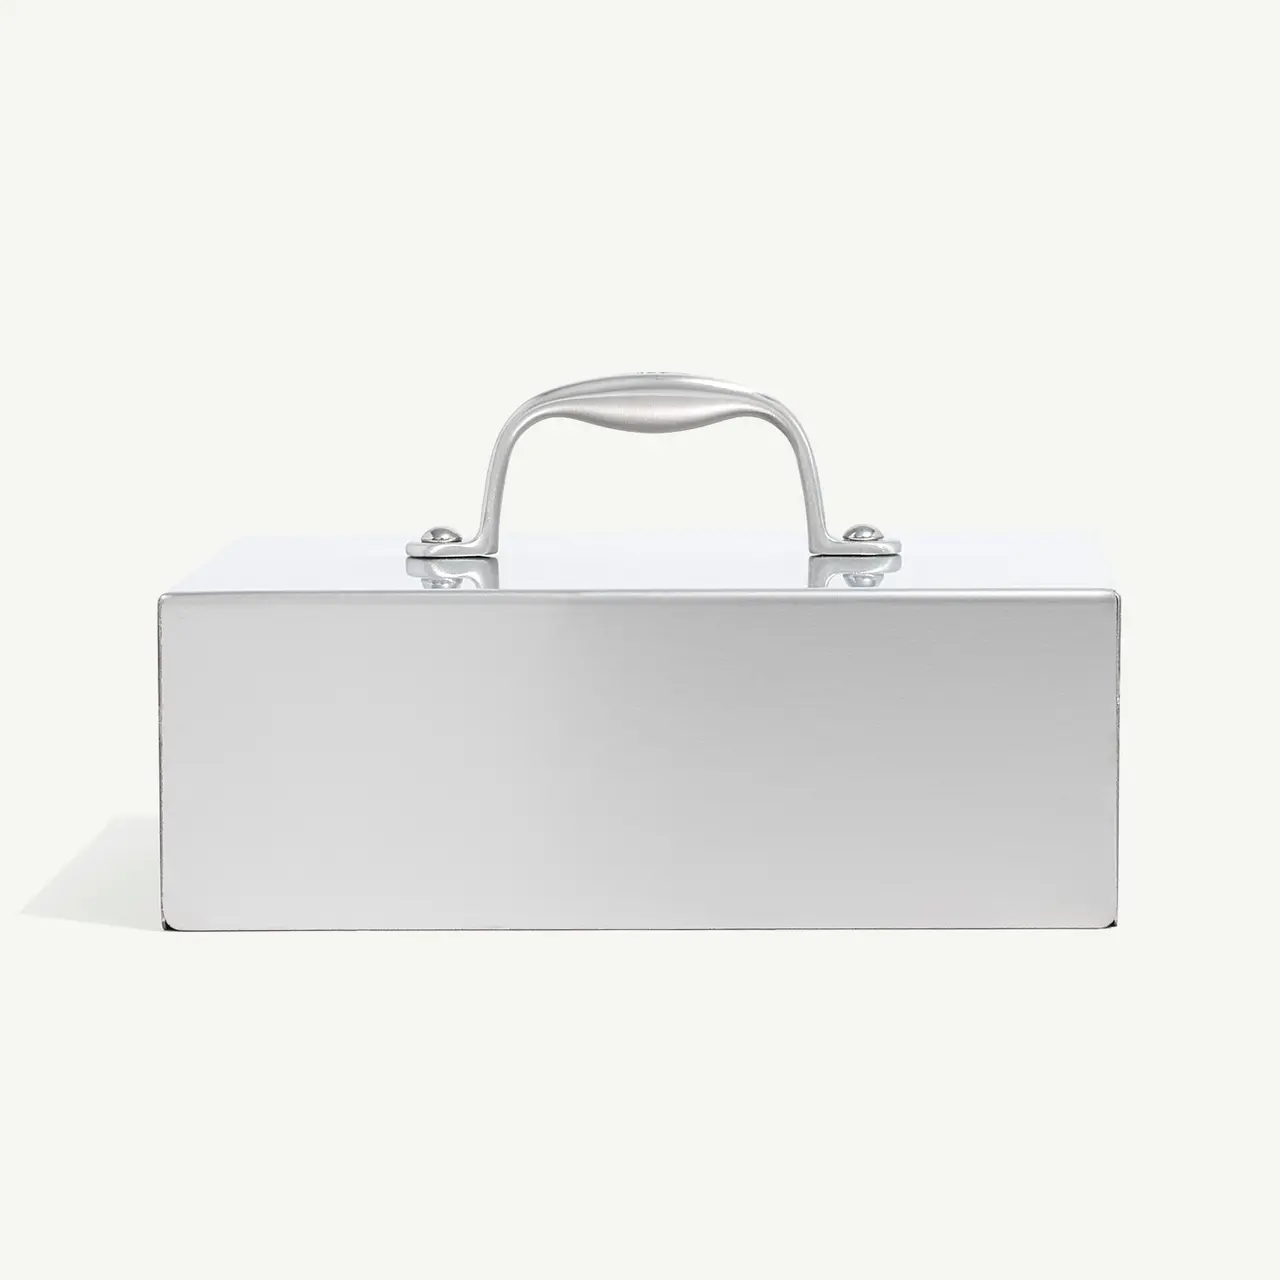 A silver metal briefcase with a sturdy handle and simple locking mechanism, placed against a light background.